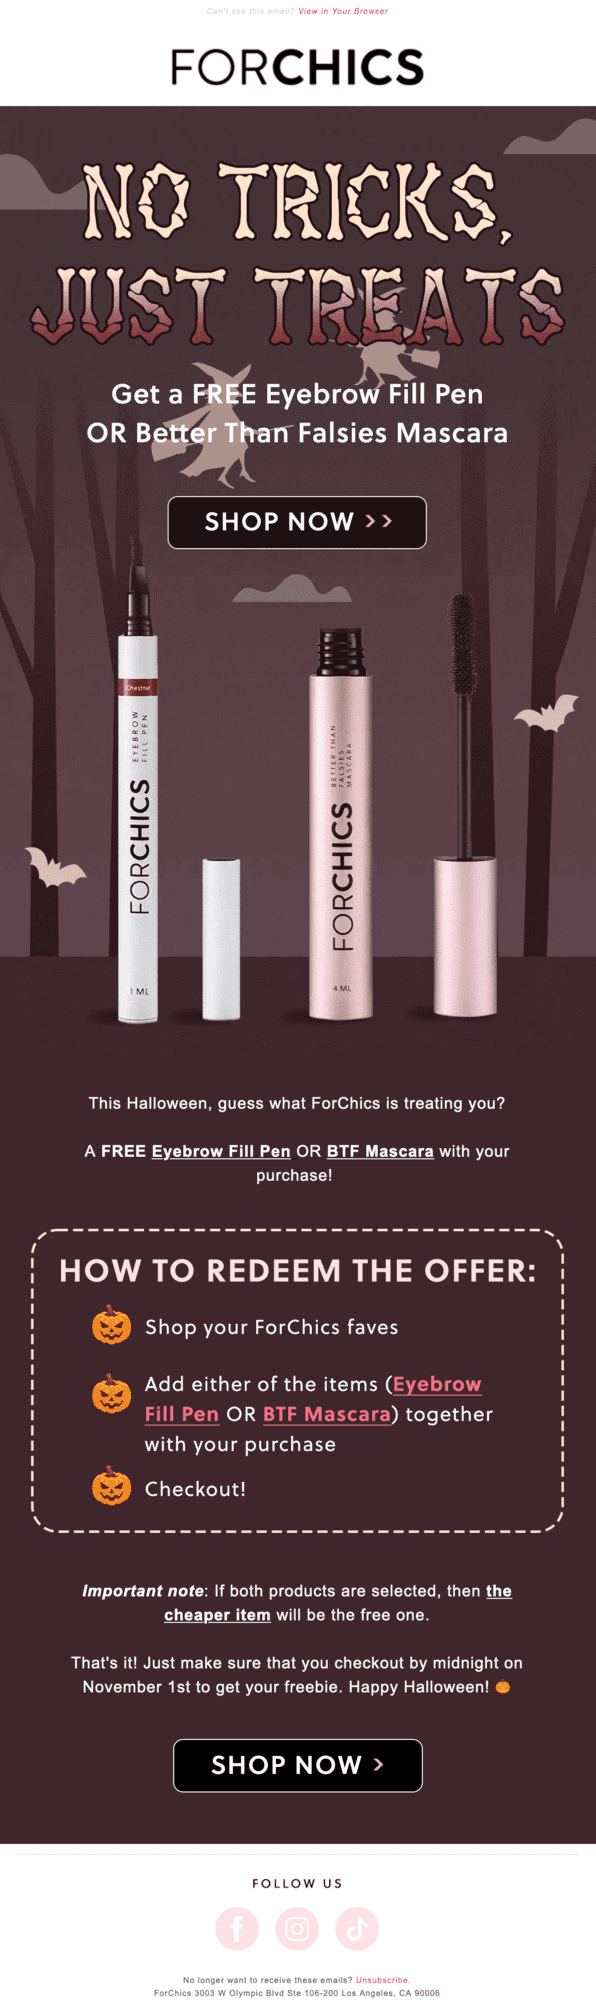 Halloween email promoting a free mascara or brow gel offer